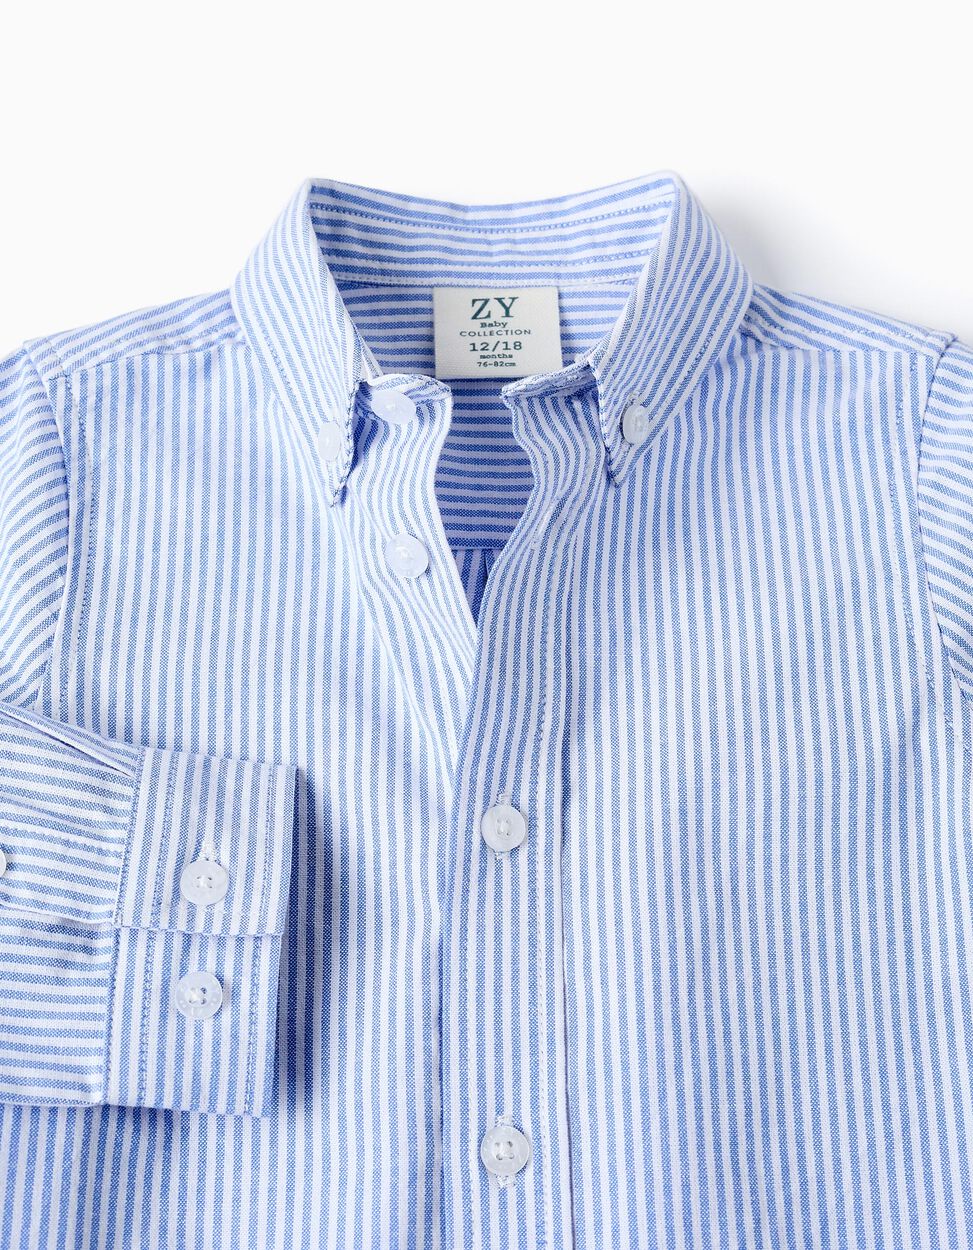 Buy Online Cotton Striped Shirt for Baby Boys, White/Blue